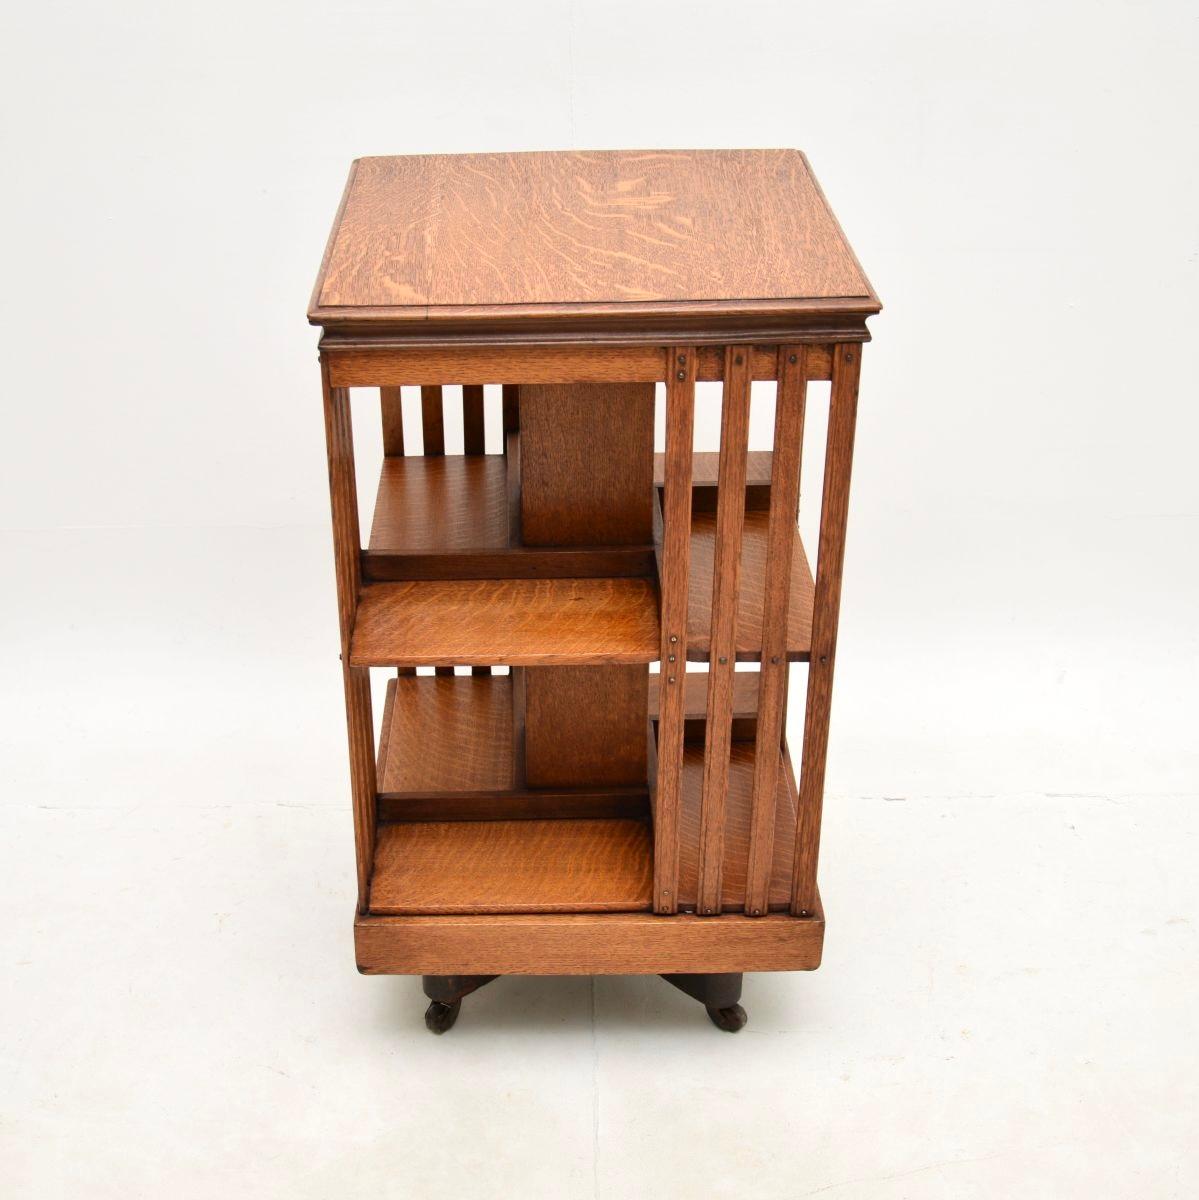 A lovely antique Edwardian oak revolving bookcase. This was made in England, it dates from around 1900-1910.

The quality is fantastic, this is a useful and beautifully designed item, the oak has a gorgeous light colour tone and patina. It sits on a